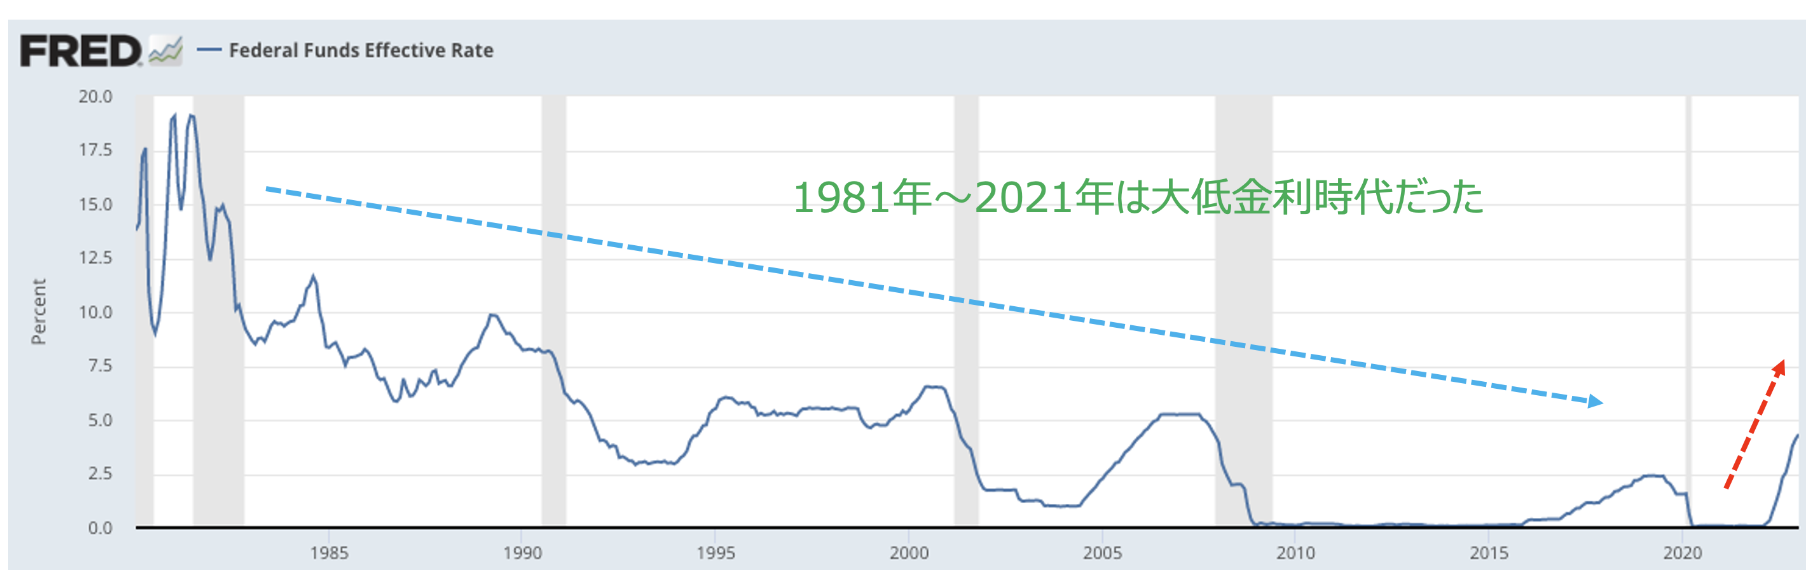 Federal Funds Effective Rate (FEDFUNDS)